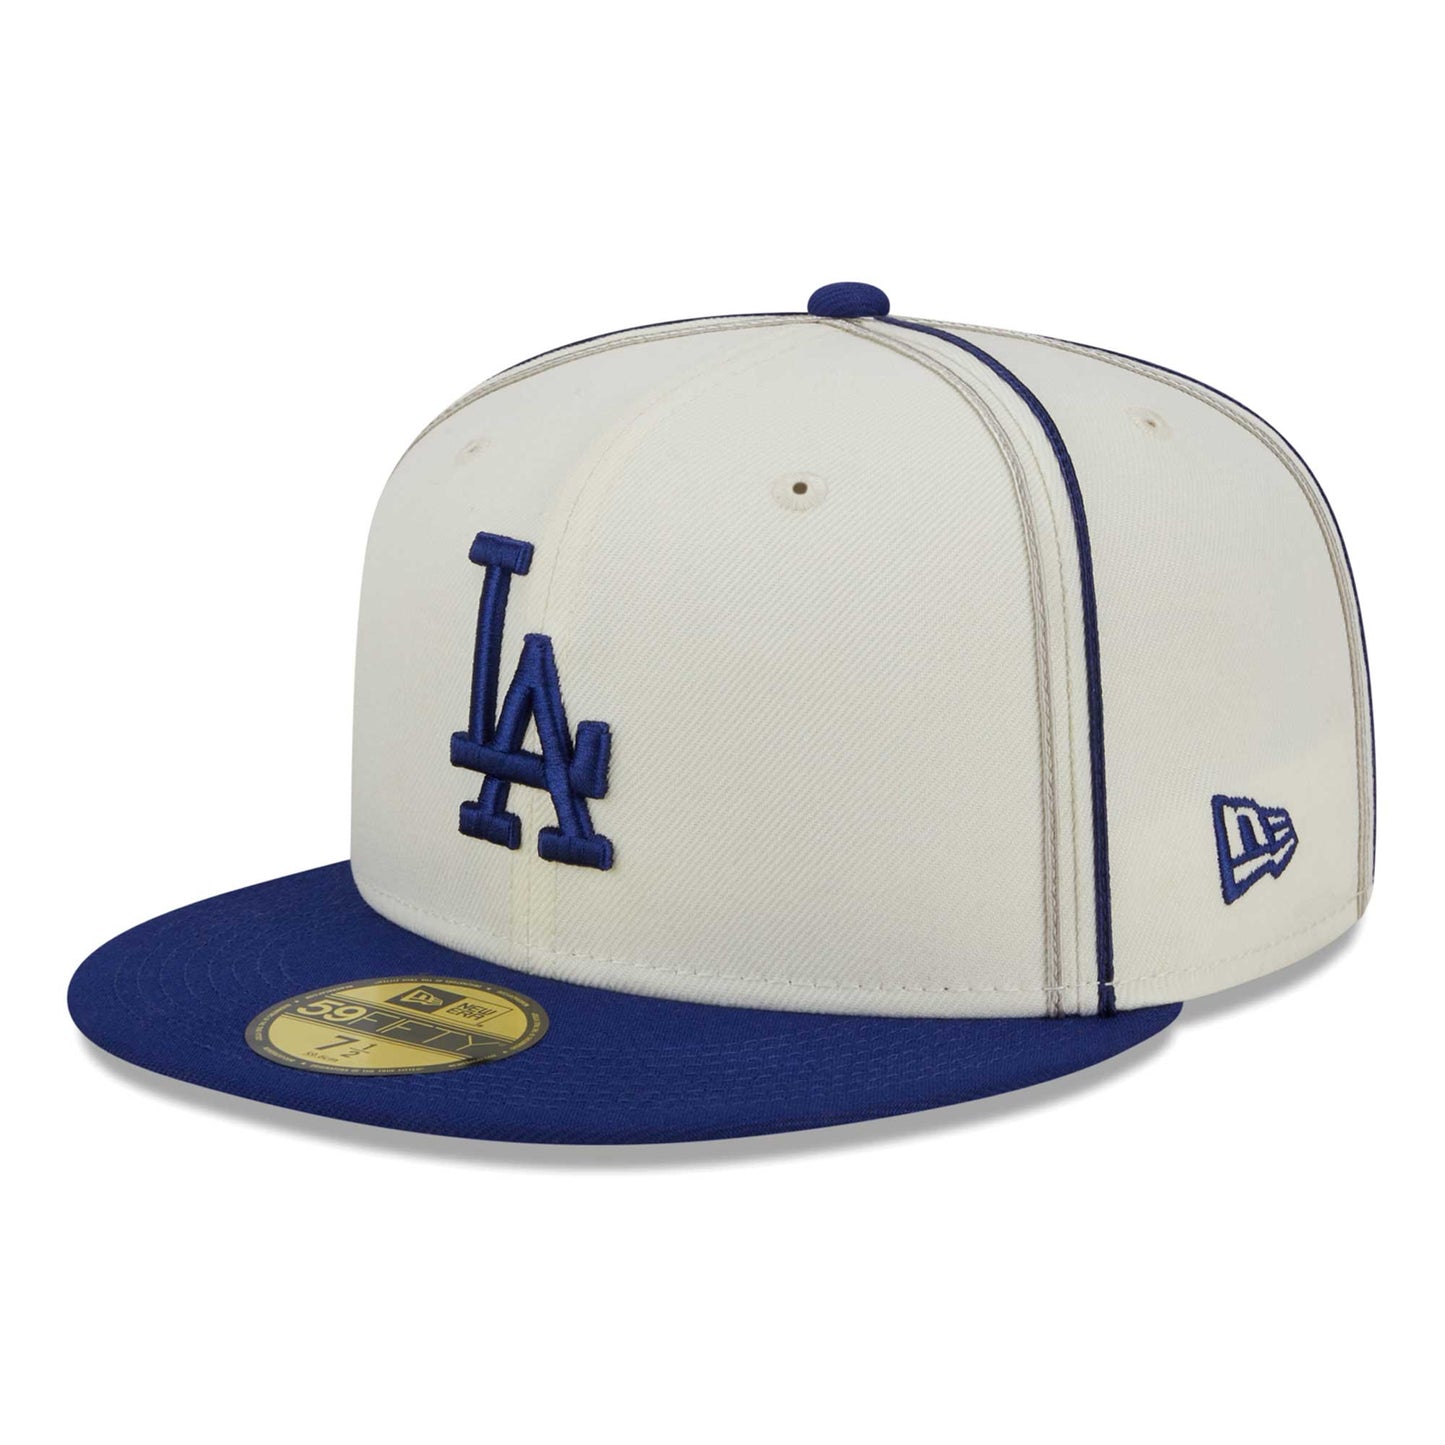 Los Angeles Dodgers New Era Chrome Sutash 59FIFTY Fitted Hat - Cream/Royal